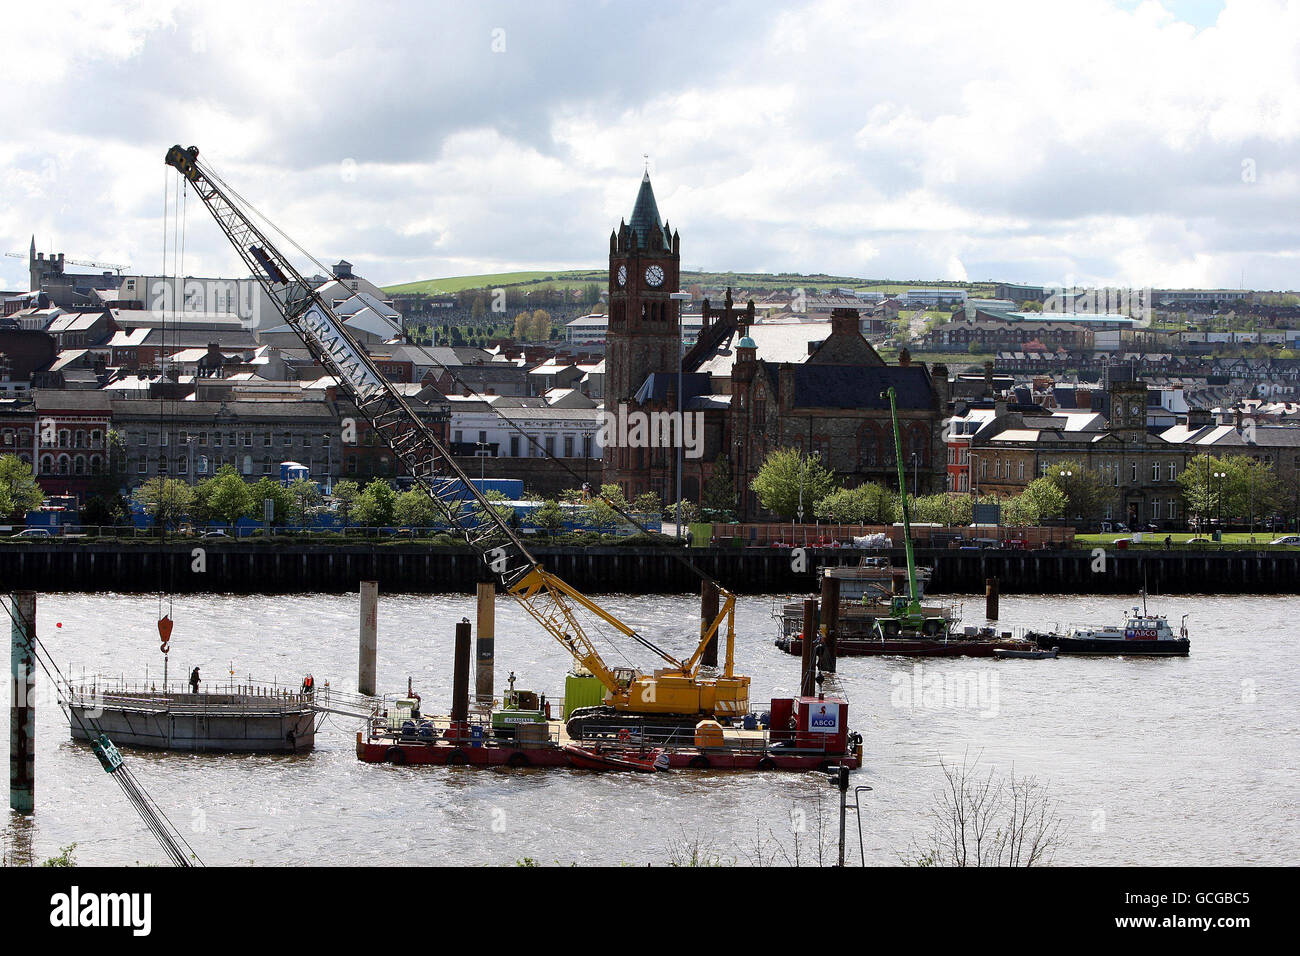 Construction of the Peace Bridge across the river Foyle. The bridge (which will cost 8.7m as part of a wider 13.3m project) is part of a regeneration scheme. Londonderry, is now one of the last four candidates for the UK City of Culture 2013. Stock Photo